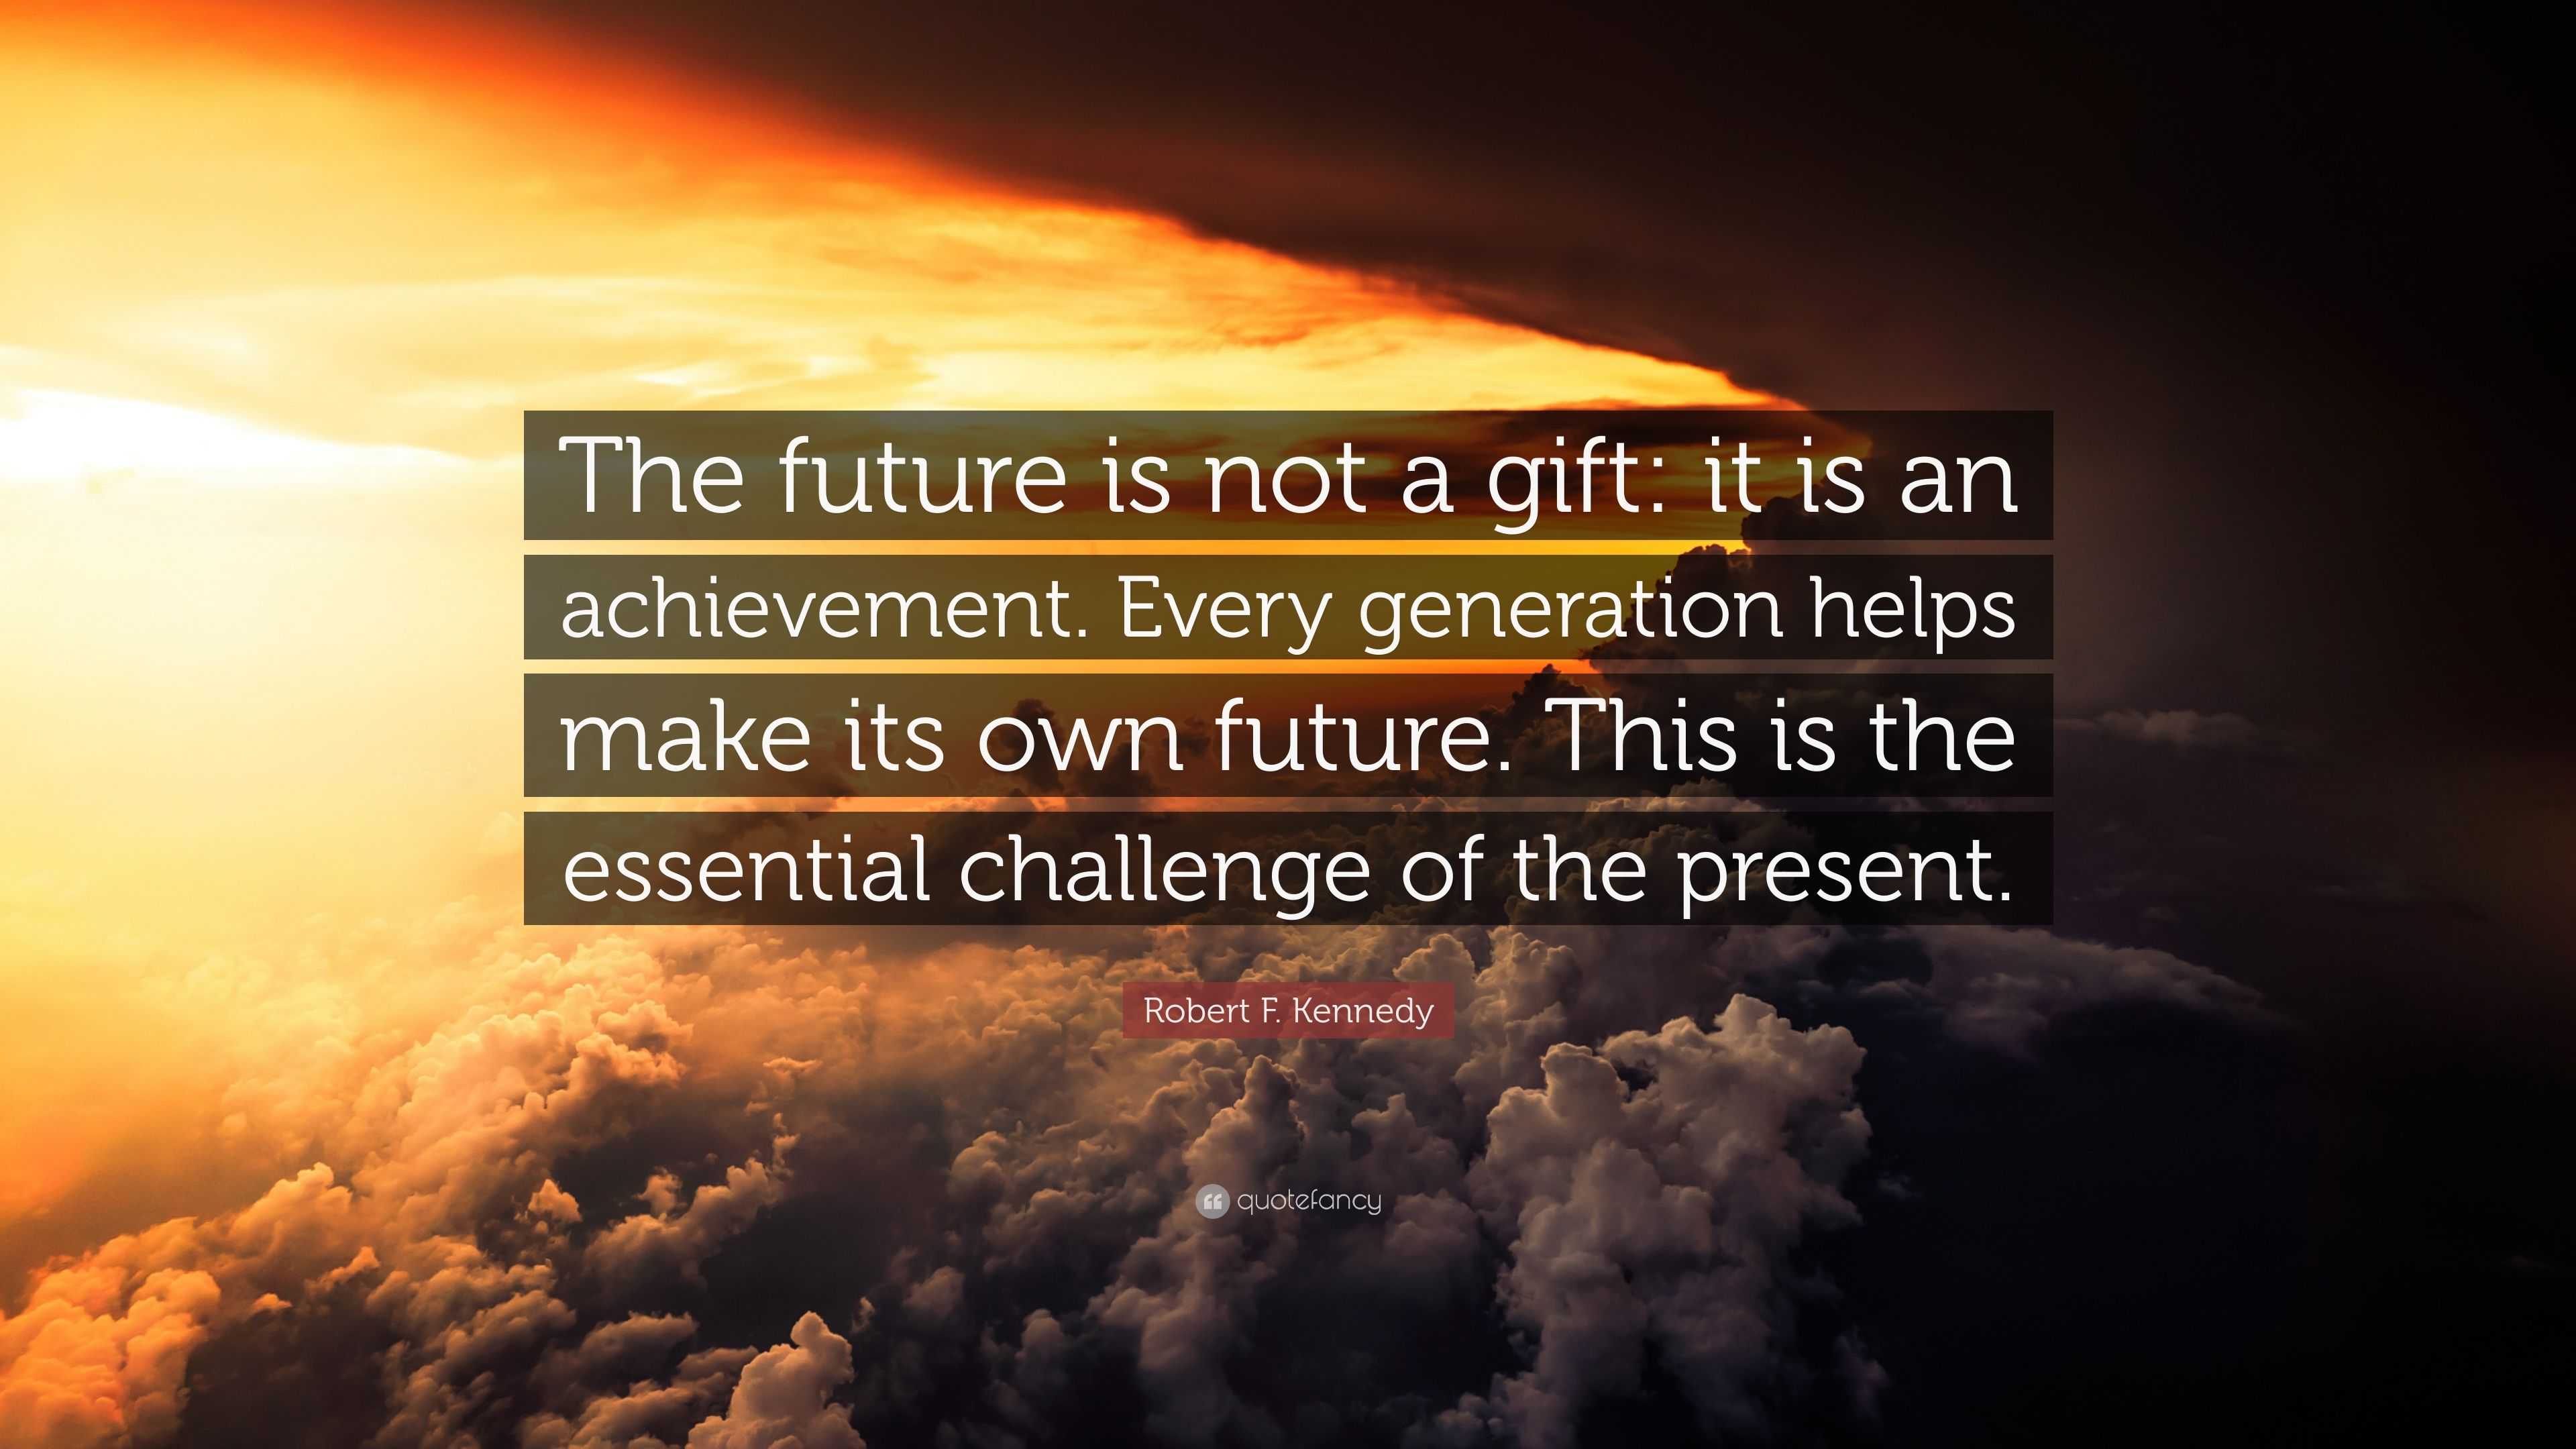 Robert F. Kennedy Quote “The future is not a gift it is an